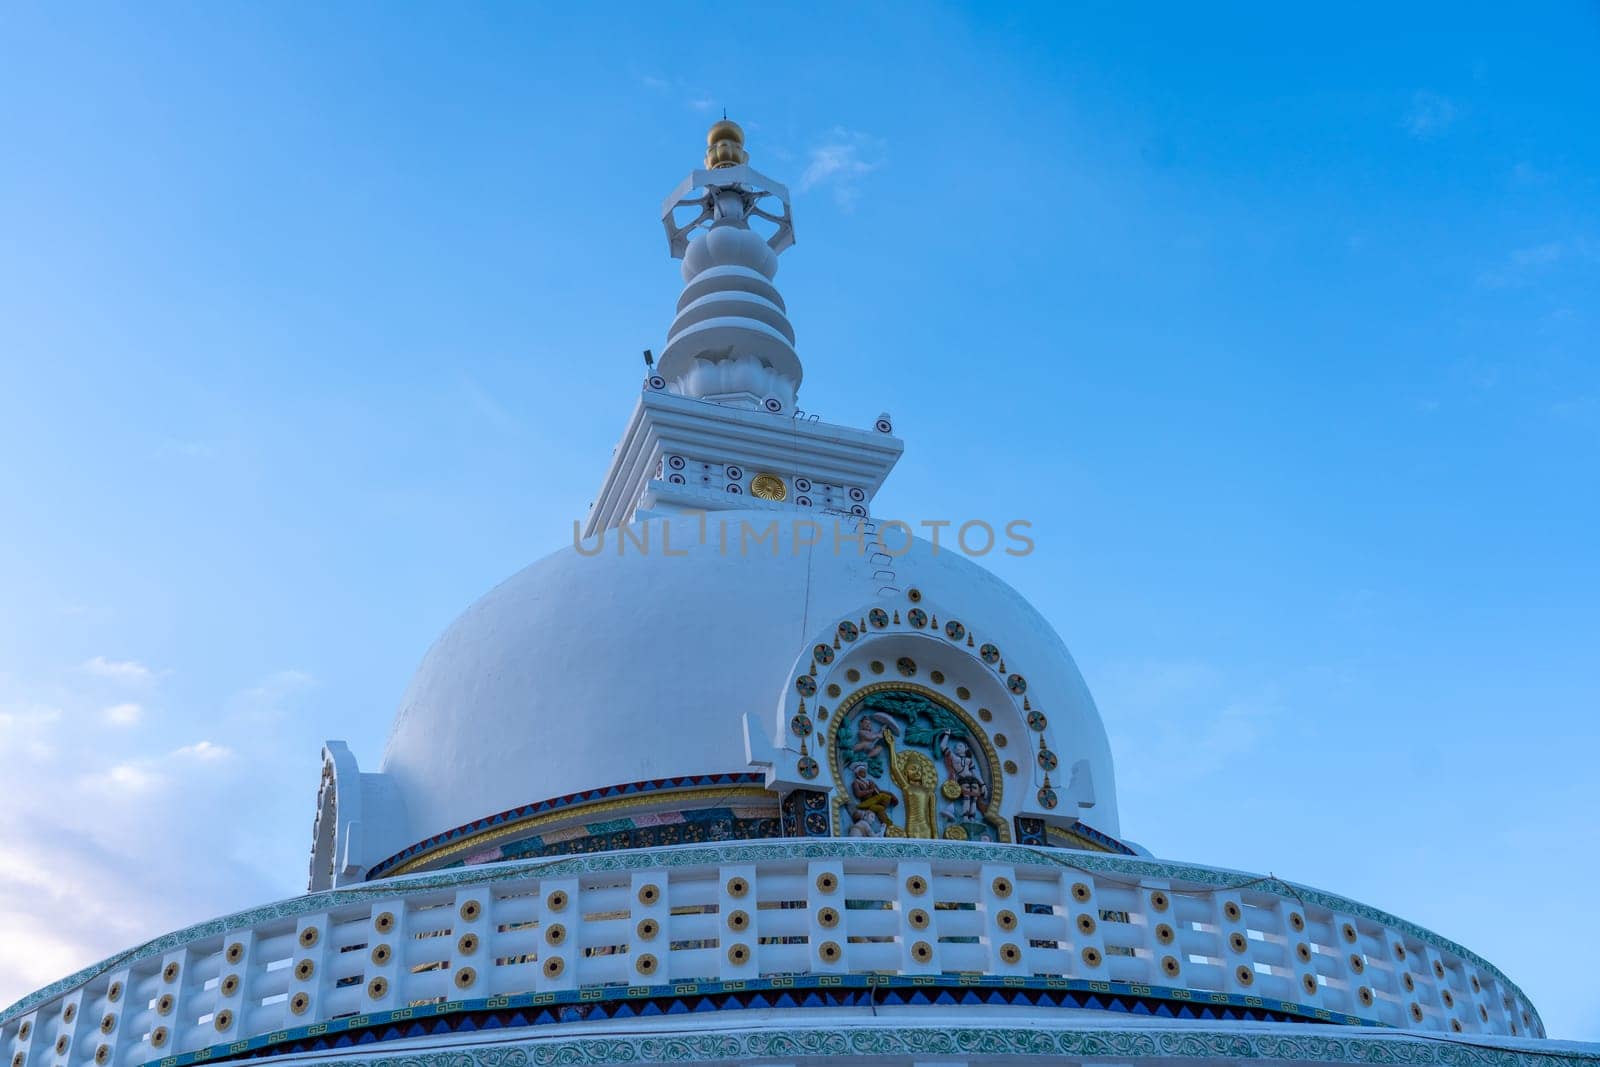 Leh, India - April 05, 2023: View of famous Shanti Stupa located on a hilltop overlooking Leh